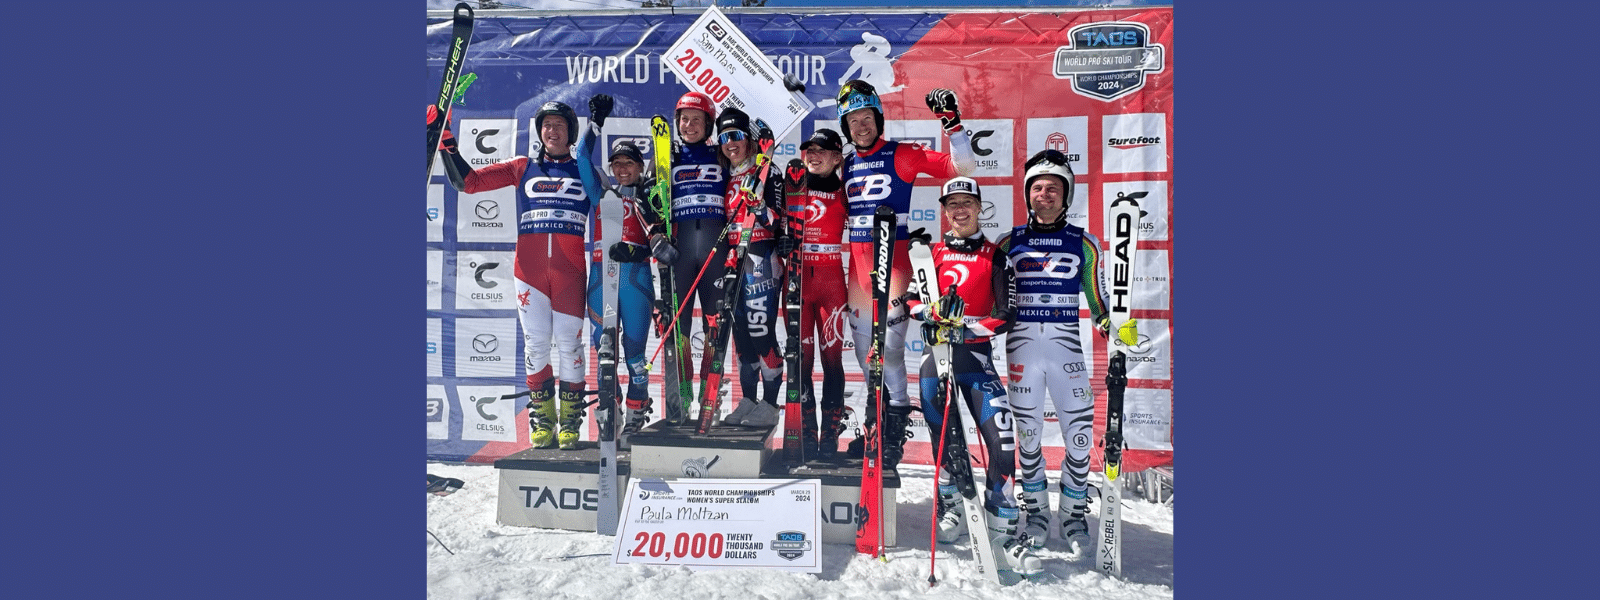 2024 World Pro Ski Tour TAOS World Championships, presented by New Mexico True Results